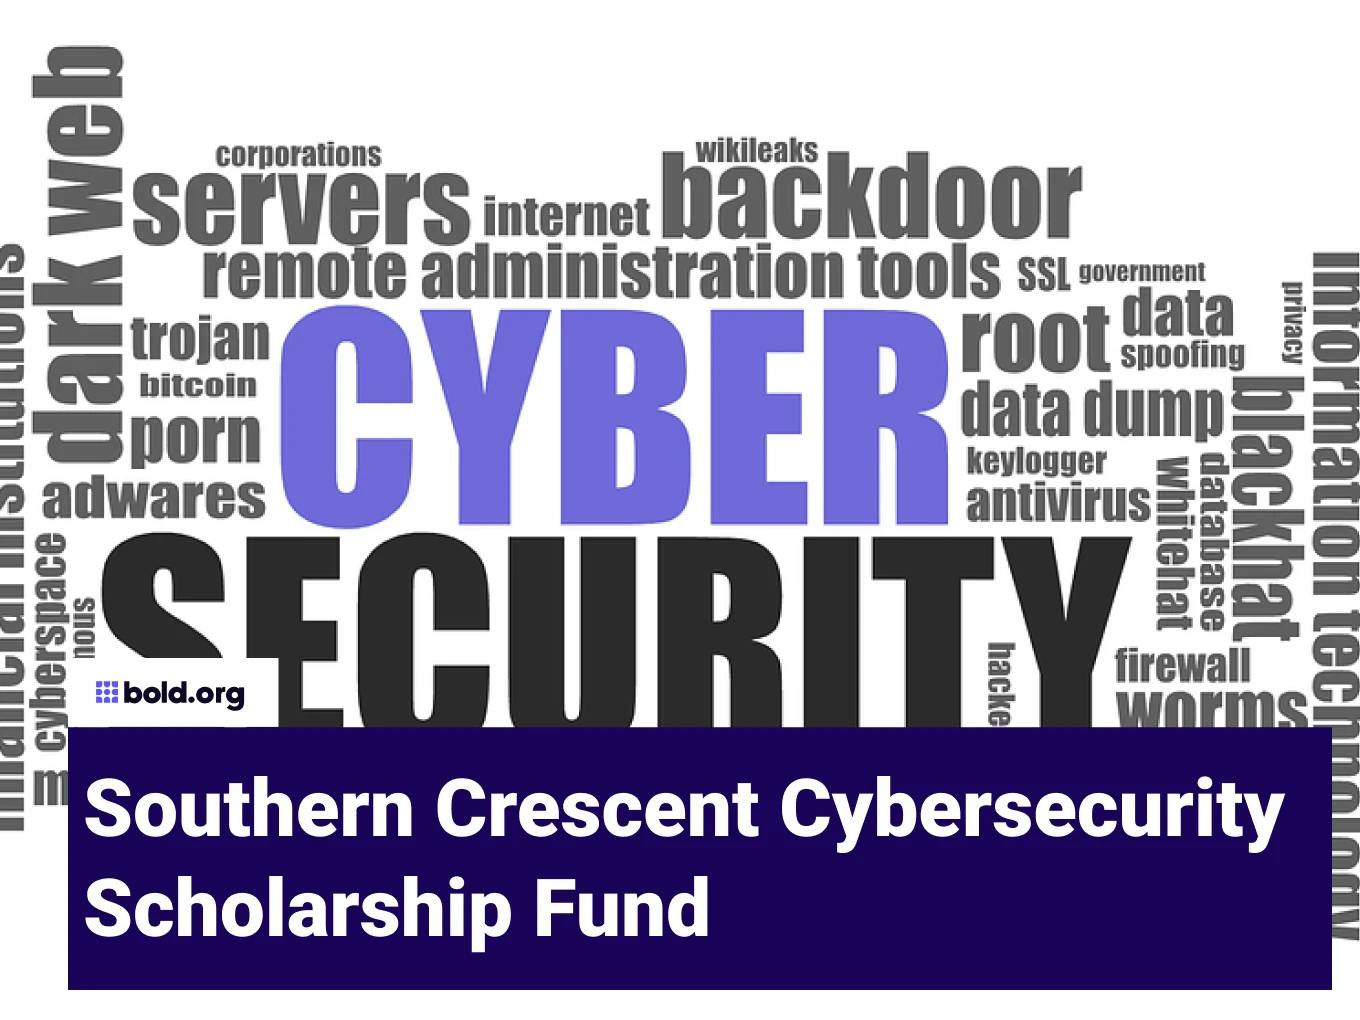 Southern Crescent Cybersecurity Scholarship Fund